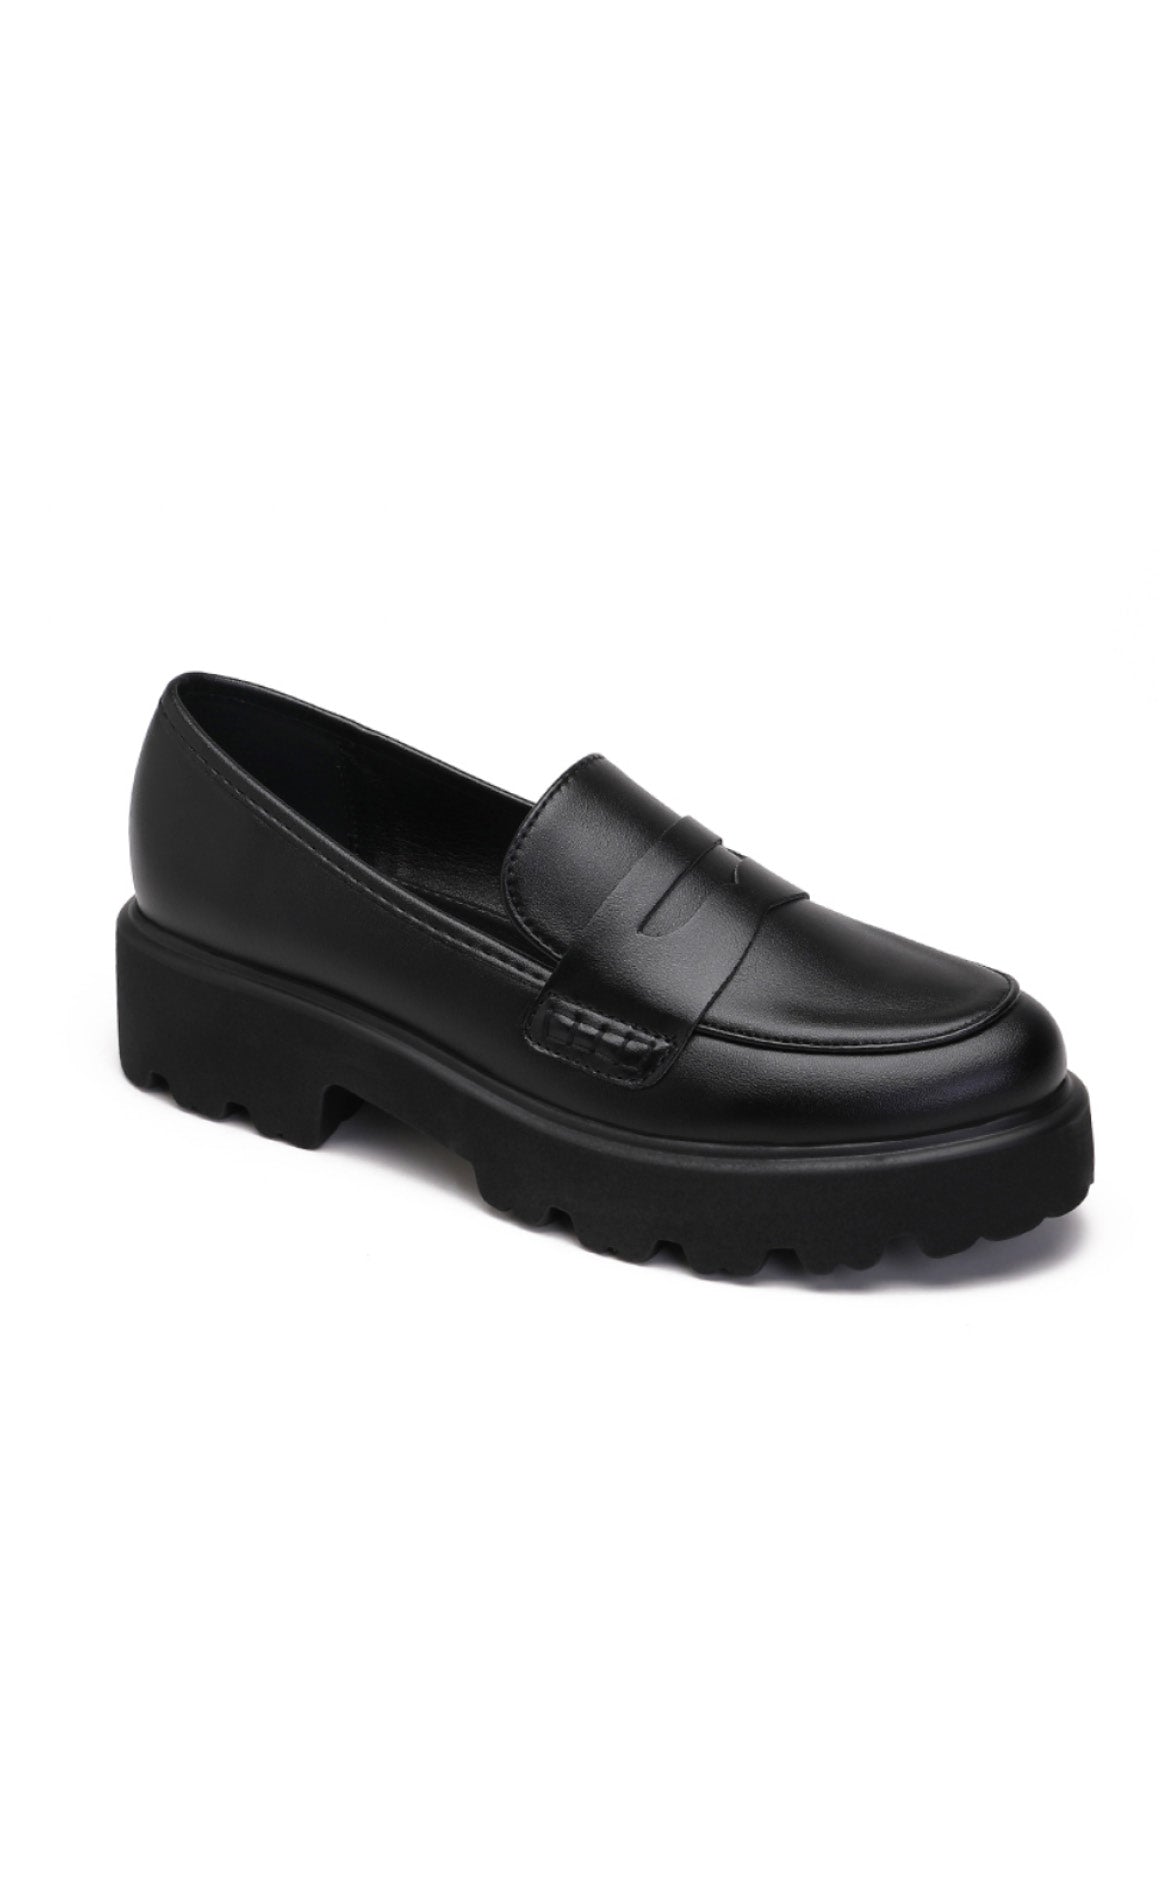 #3 - CHOSEN Loafers - Mary - Black